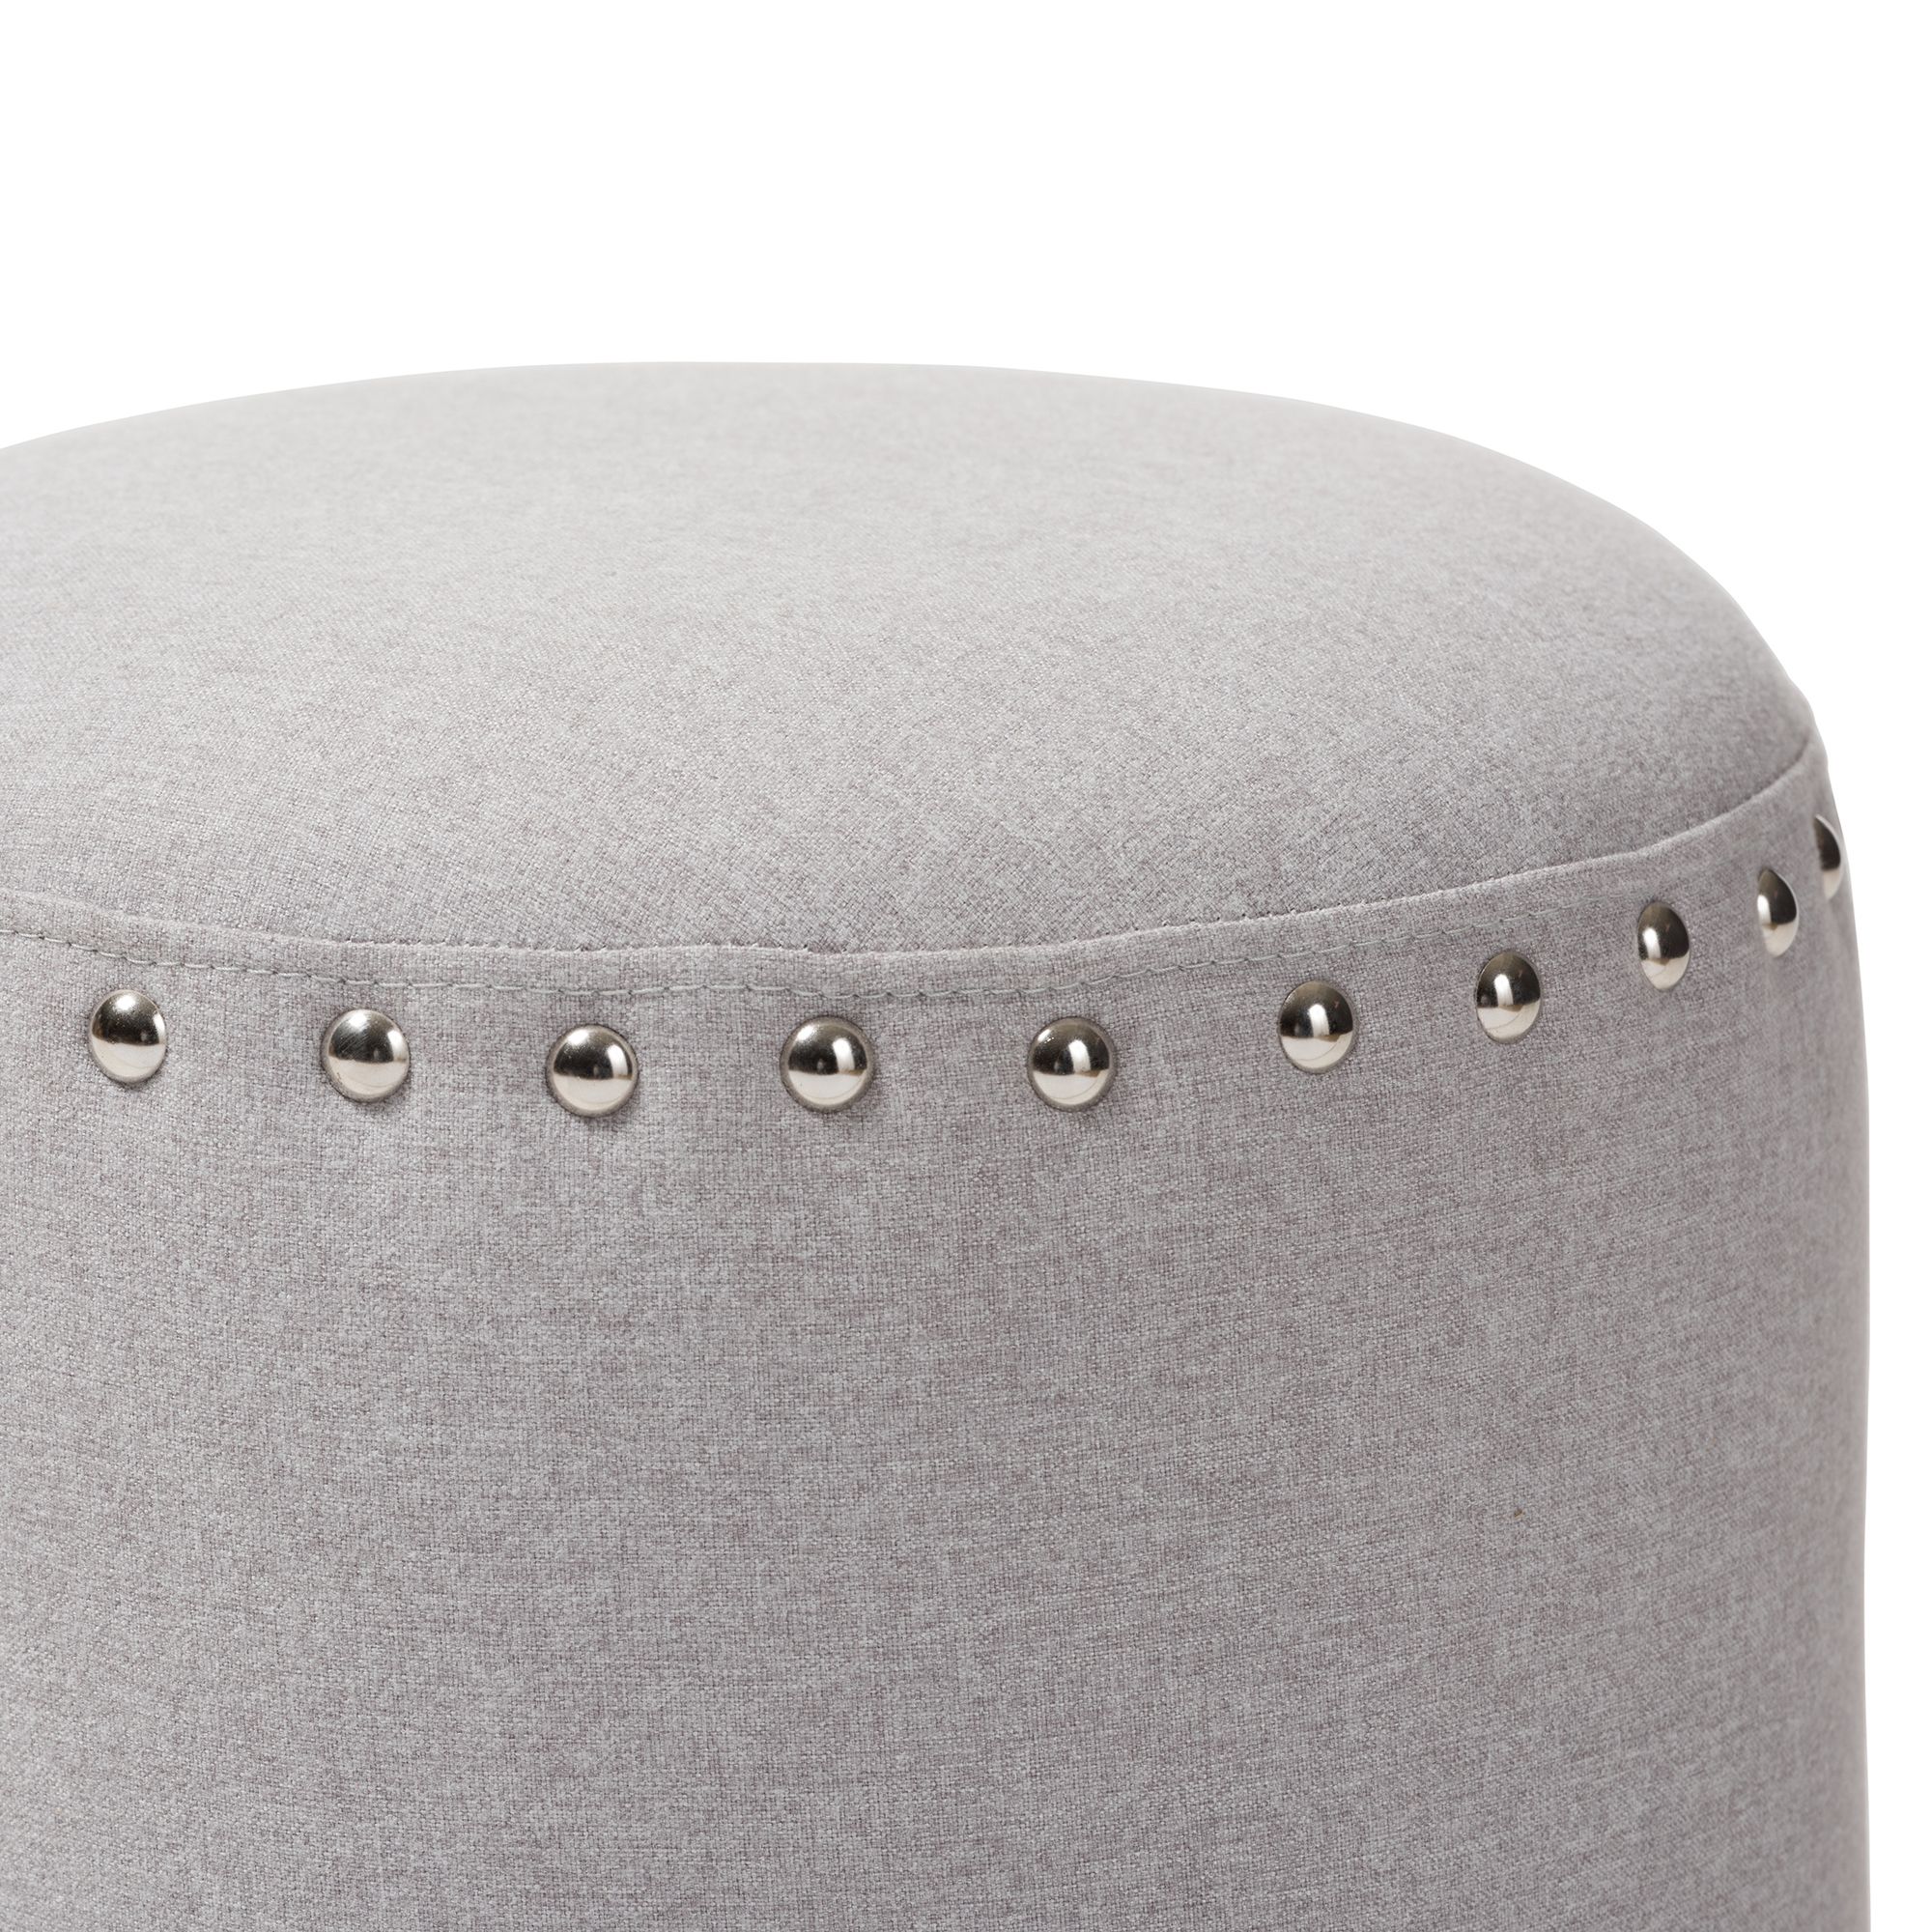 Baxton Studio Rosine Modern Nailhead Trim Studded Fabric Round Ottoman Intended For Gray Fabric Round Modern Ottomans With Rope Trim (View 11 of 20)